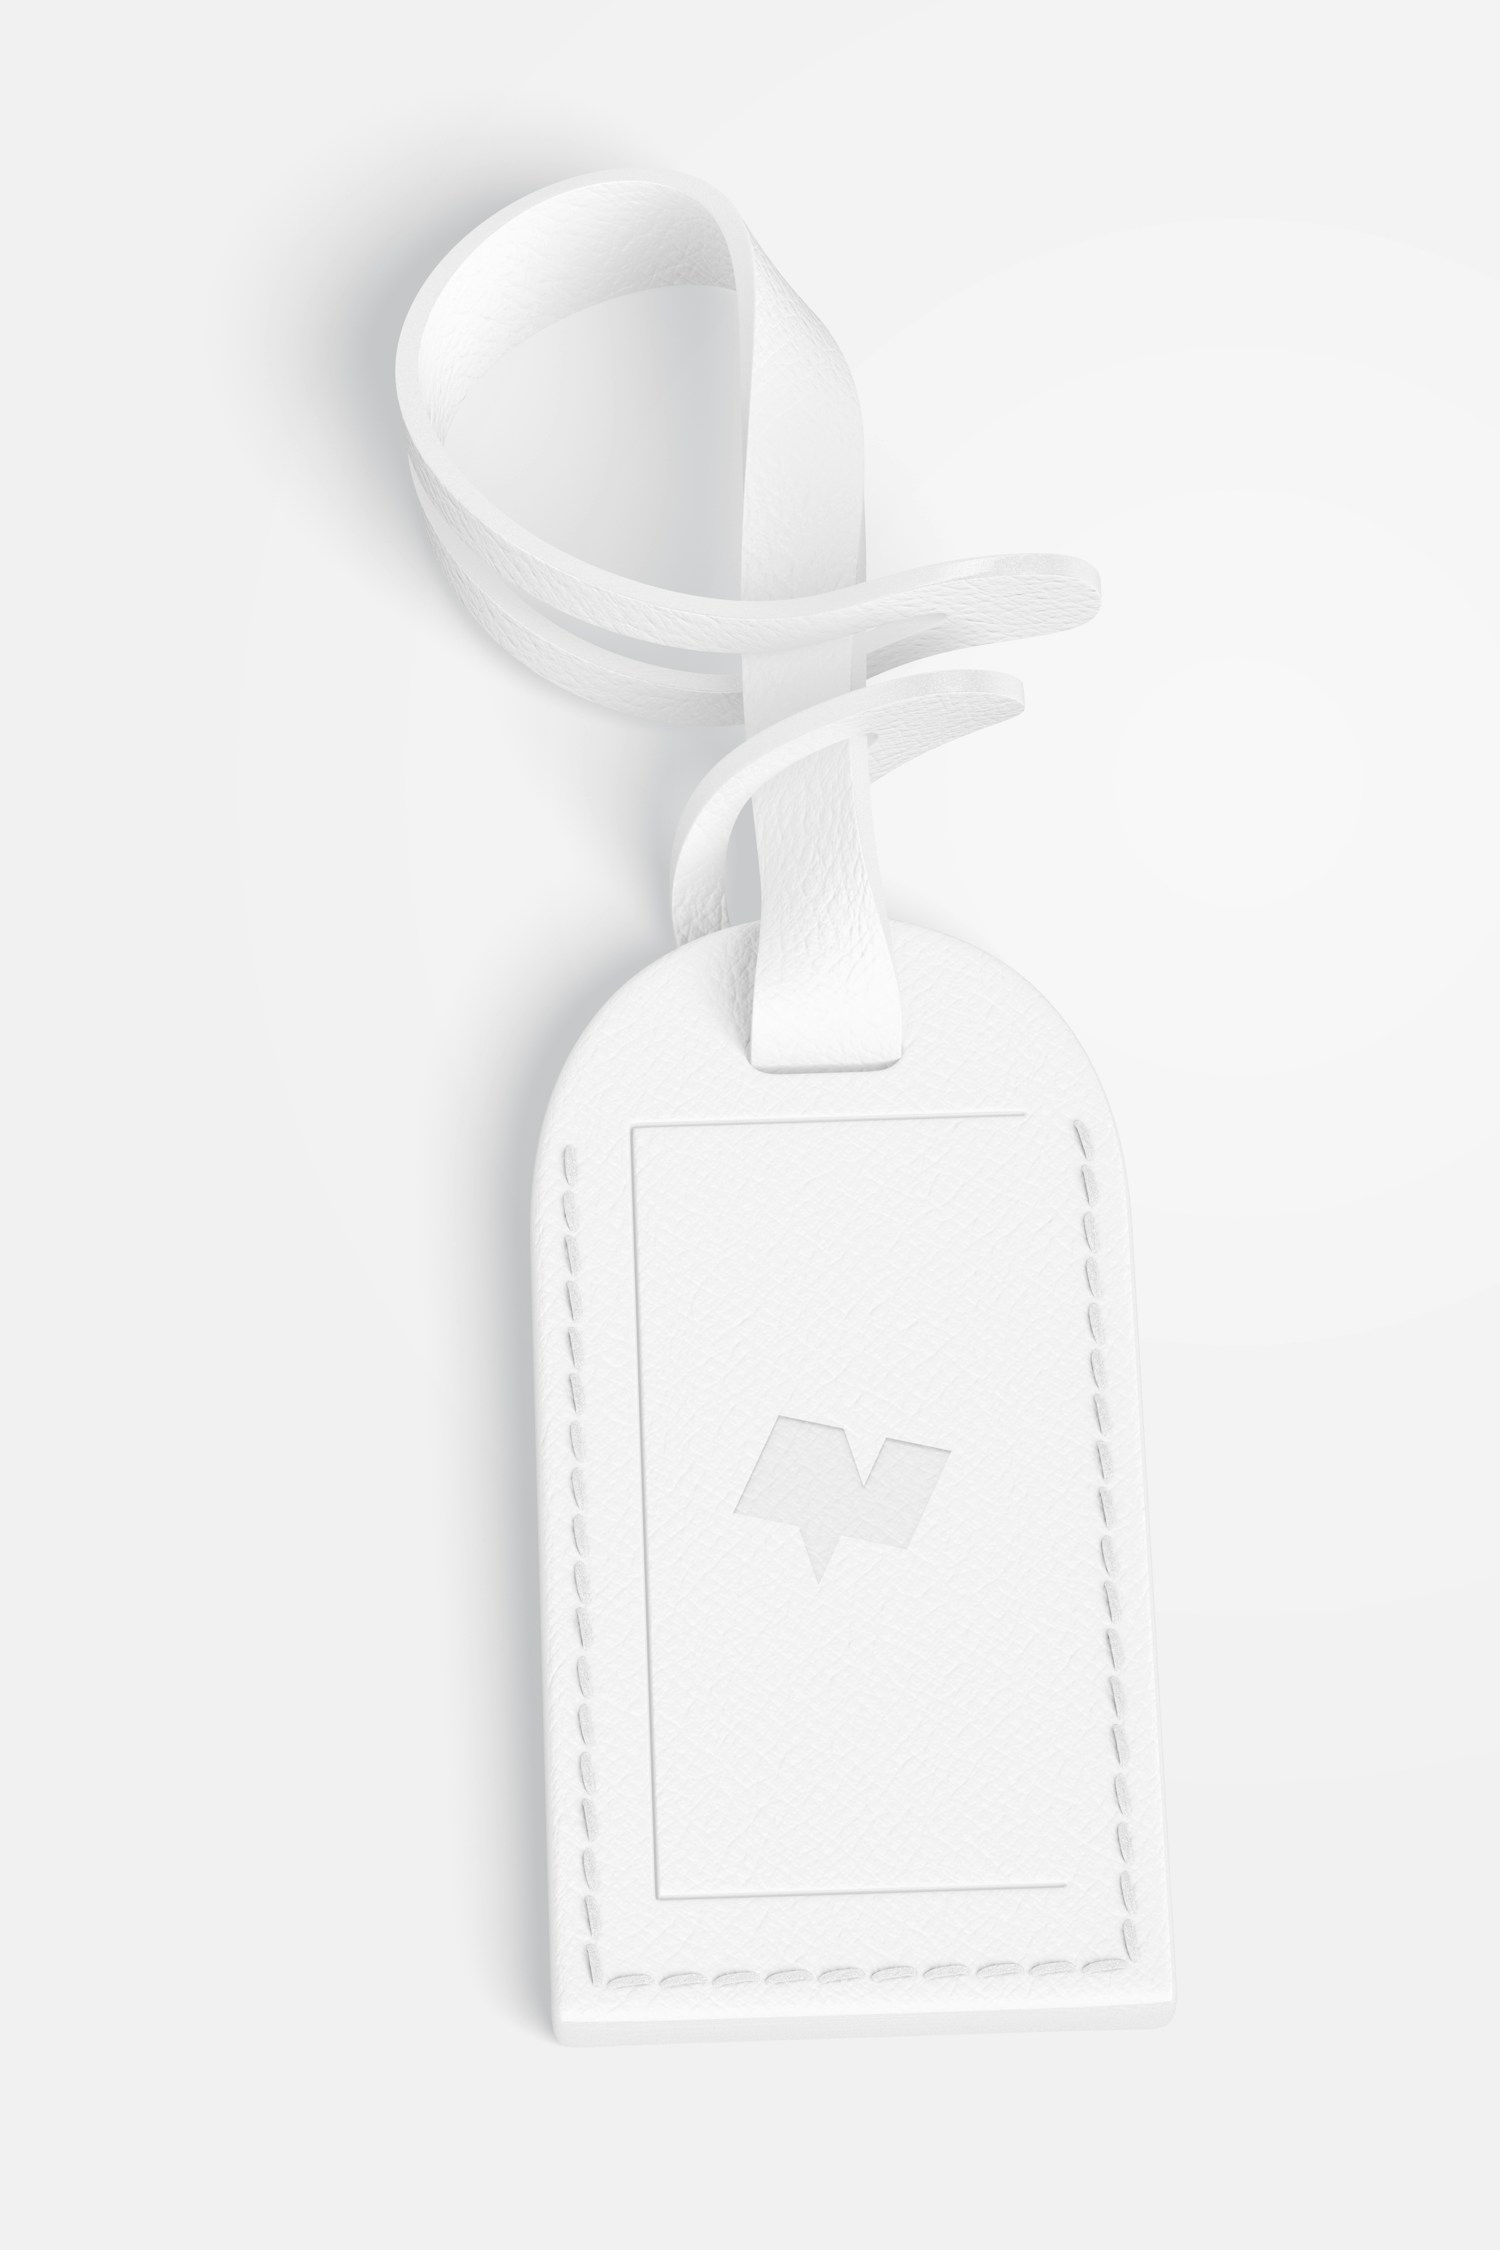 Leather ID Tag Mockup, Top View